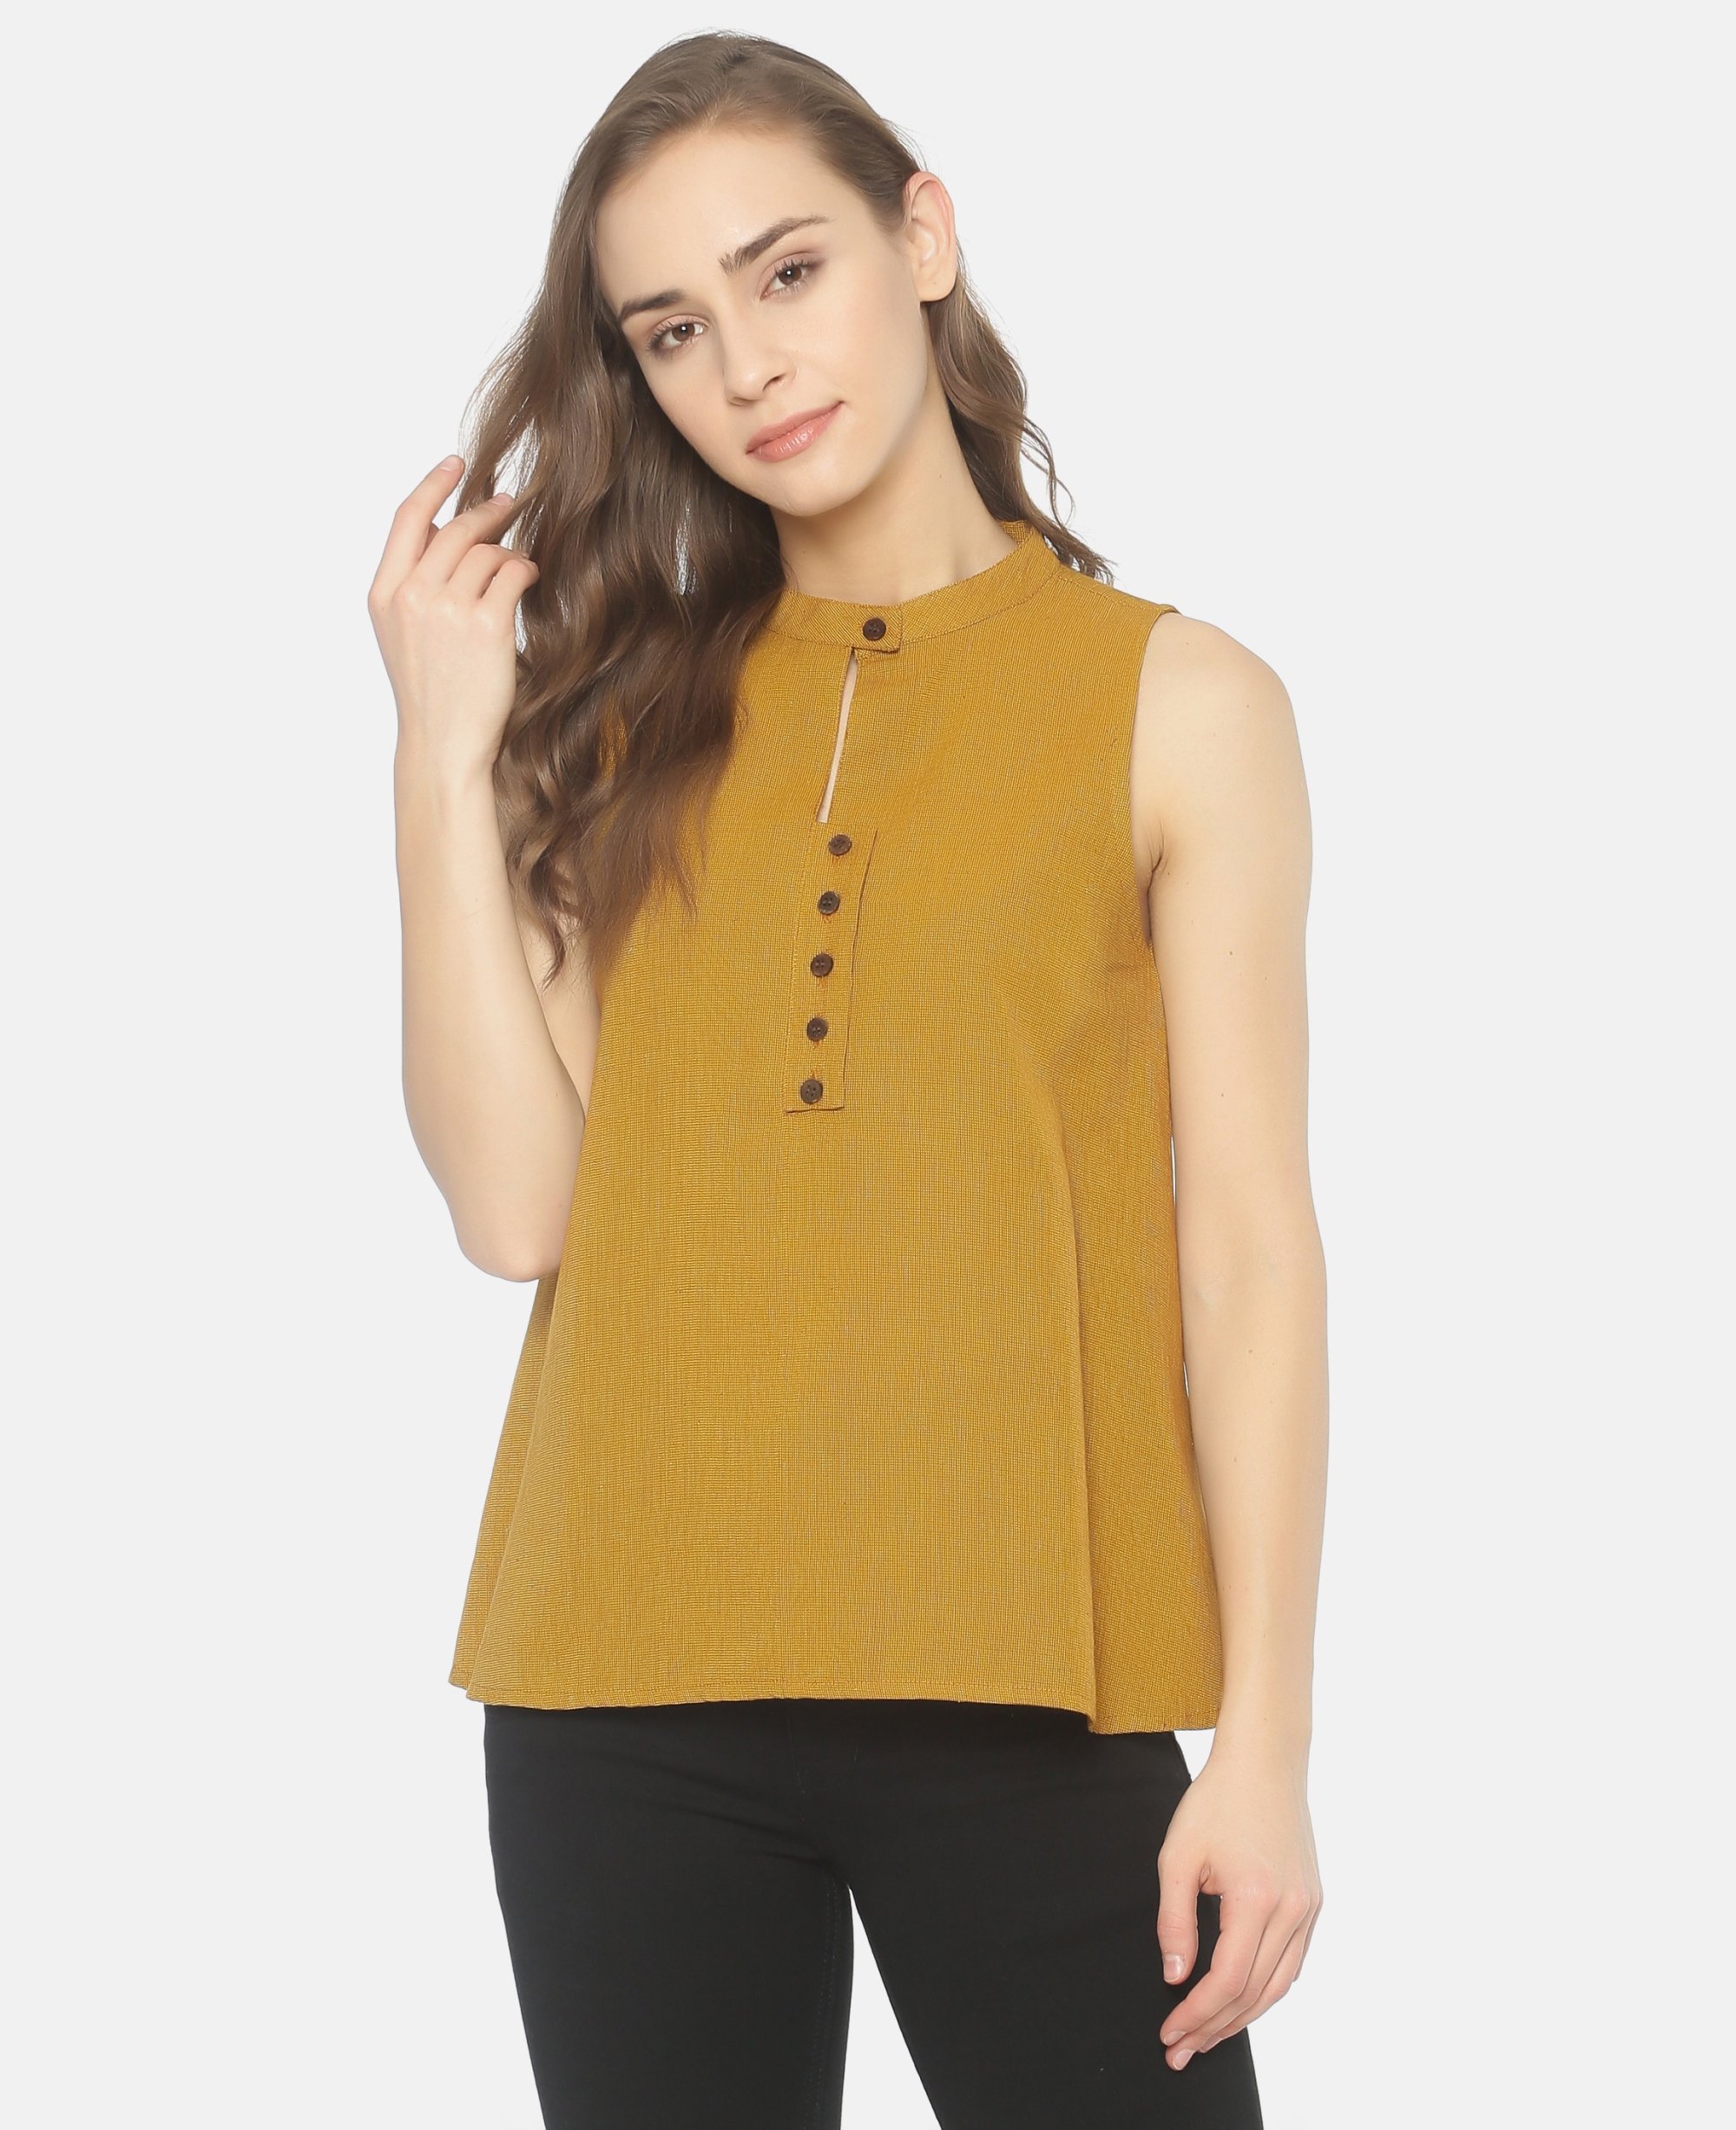 Mustard yellow buttoned top